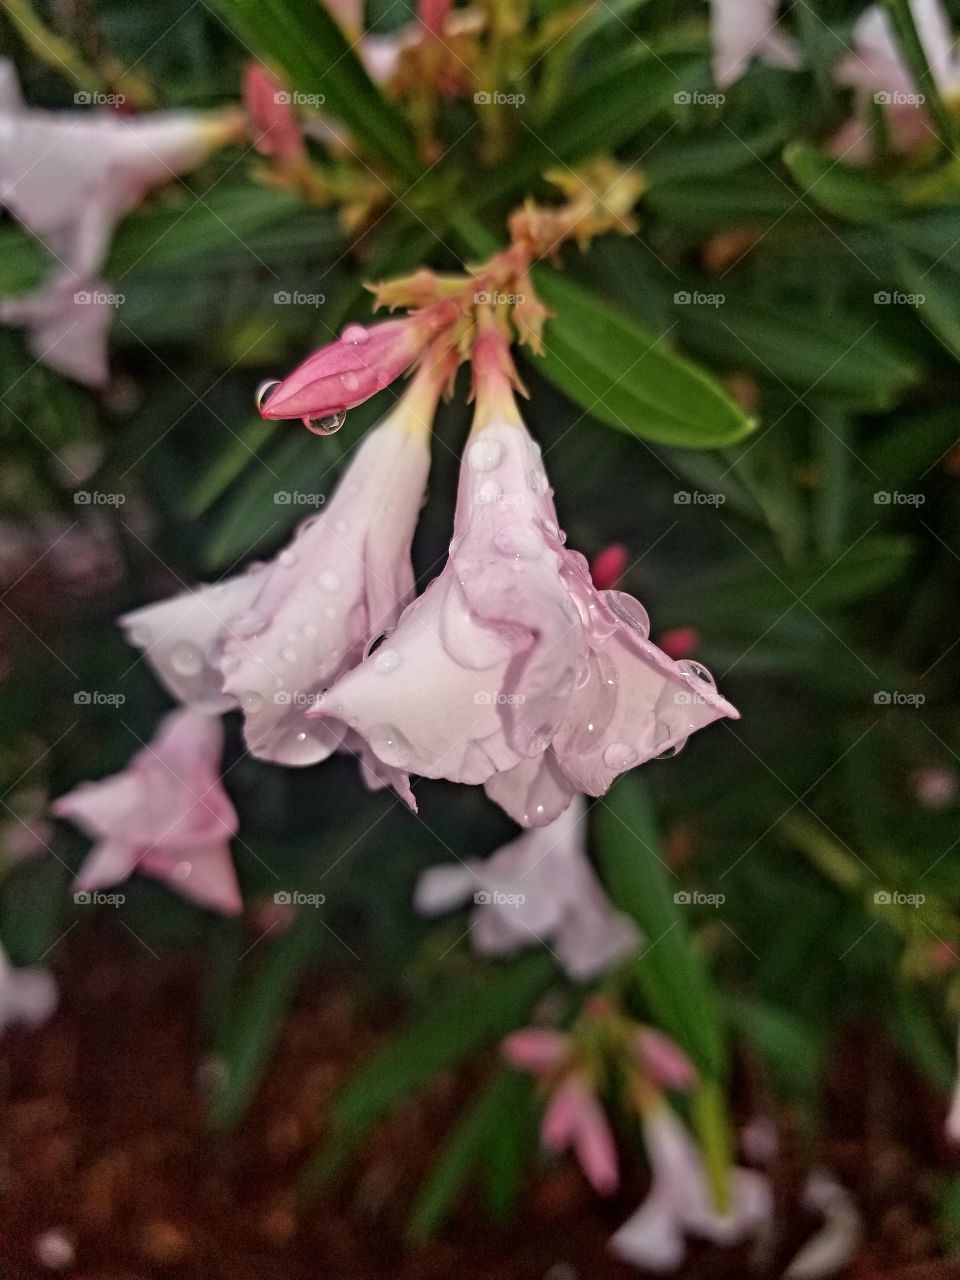 These soft pink flowers are doing a good job collecting rain drops.